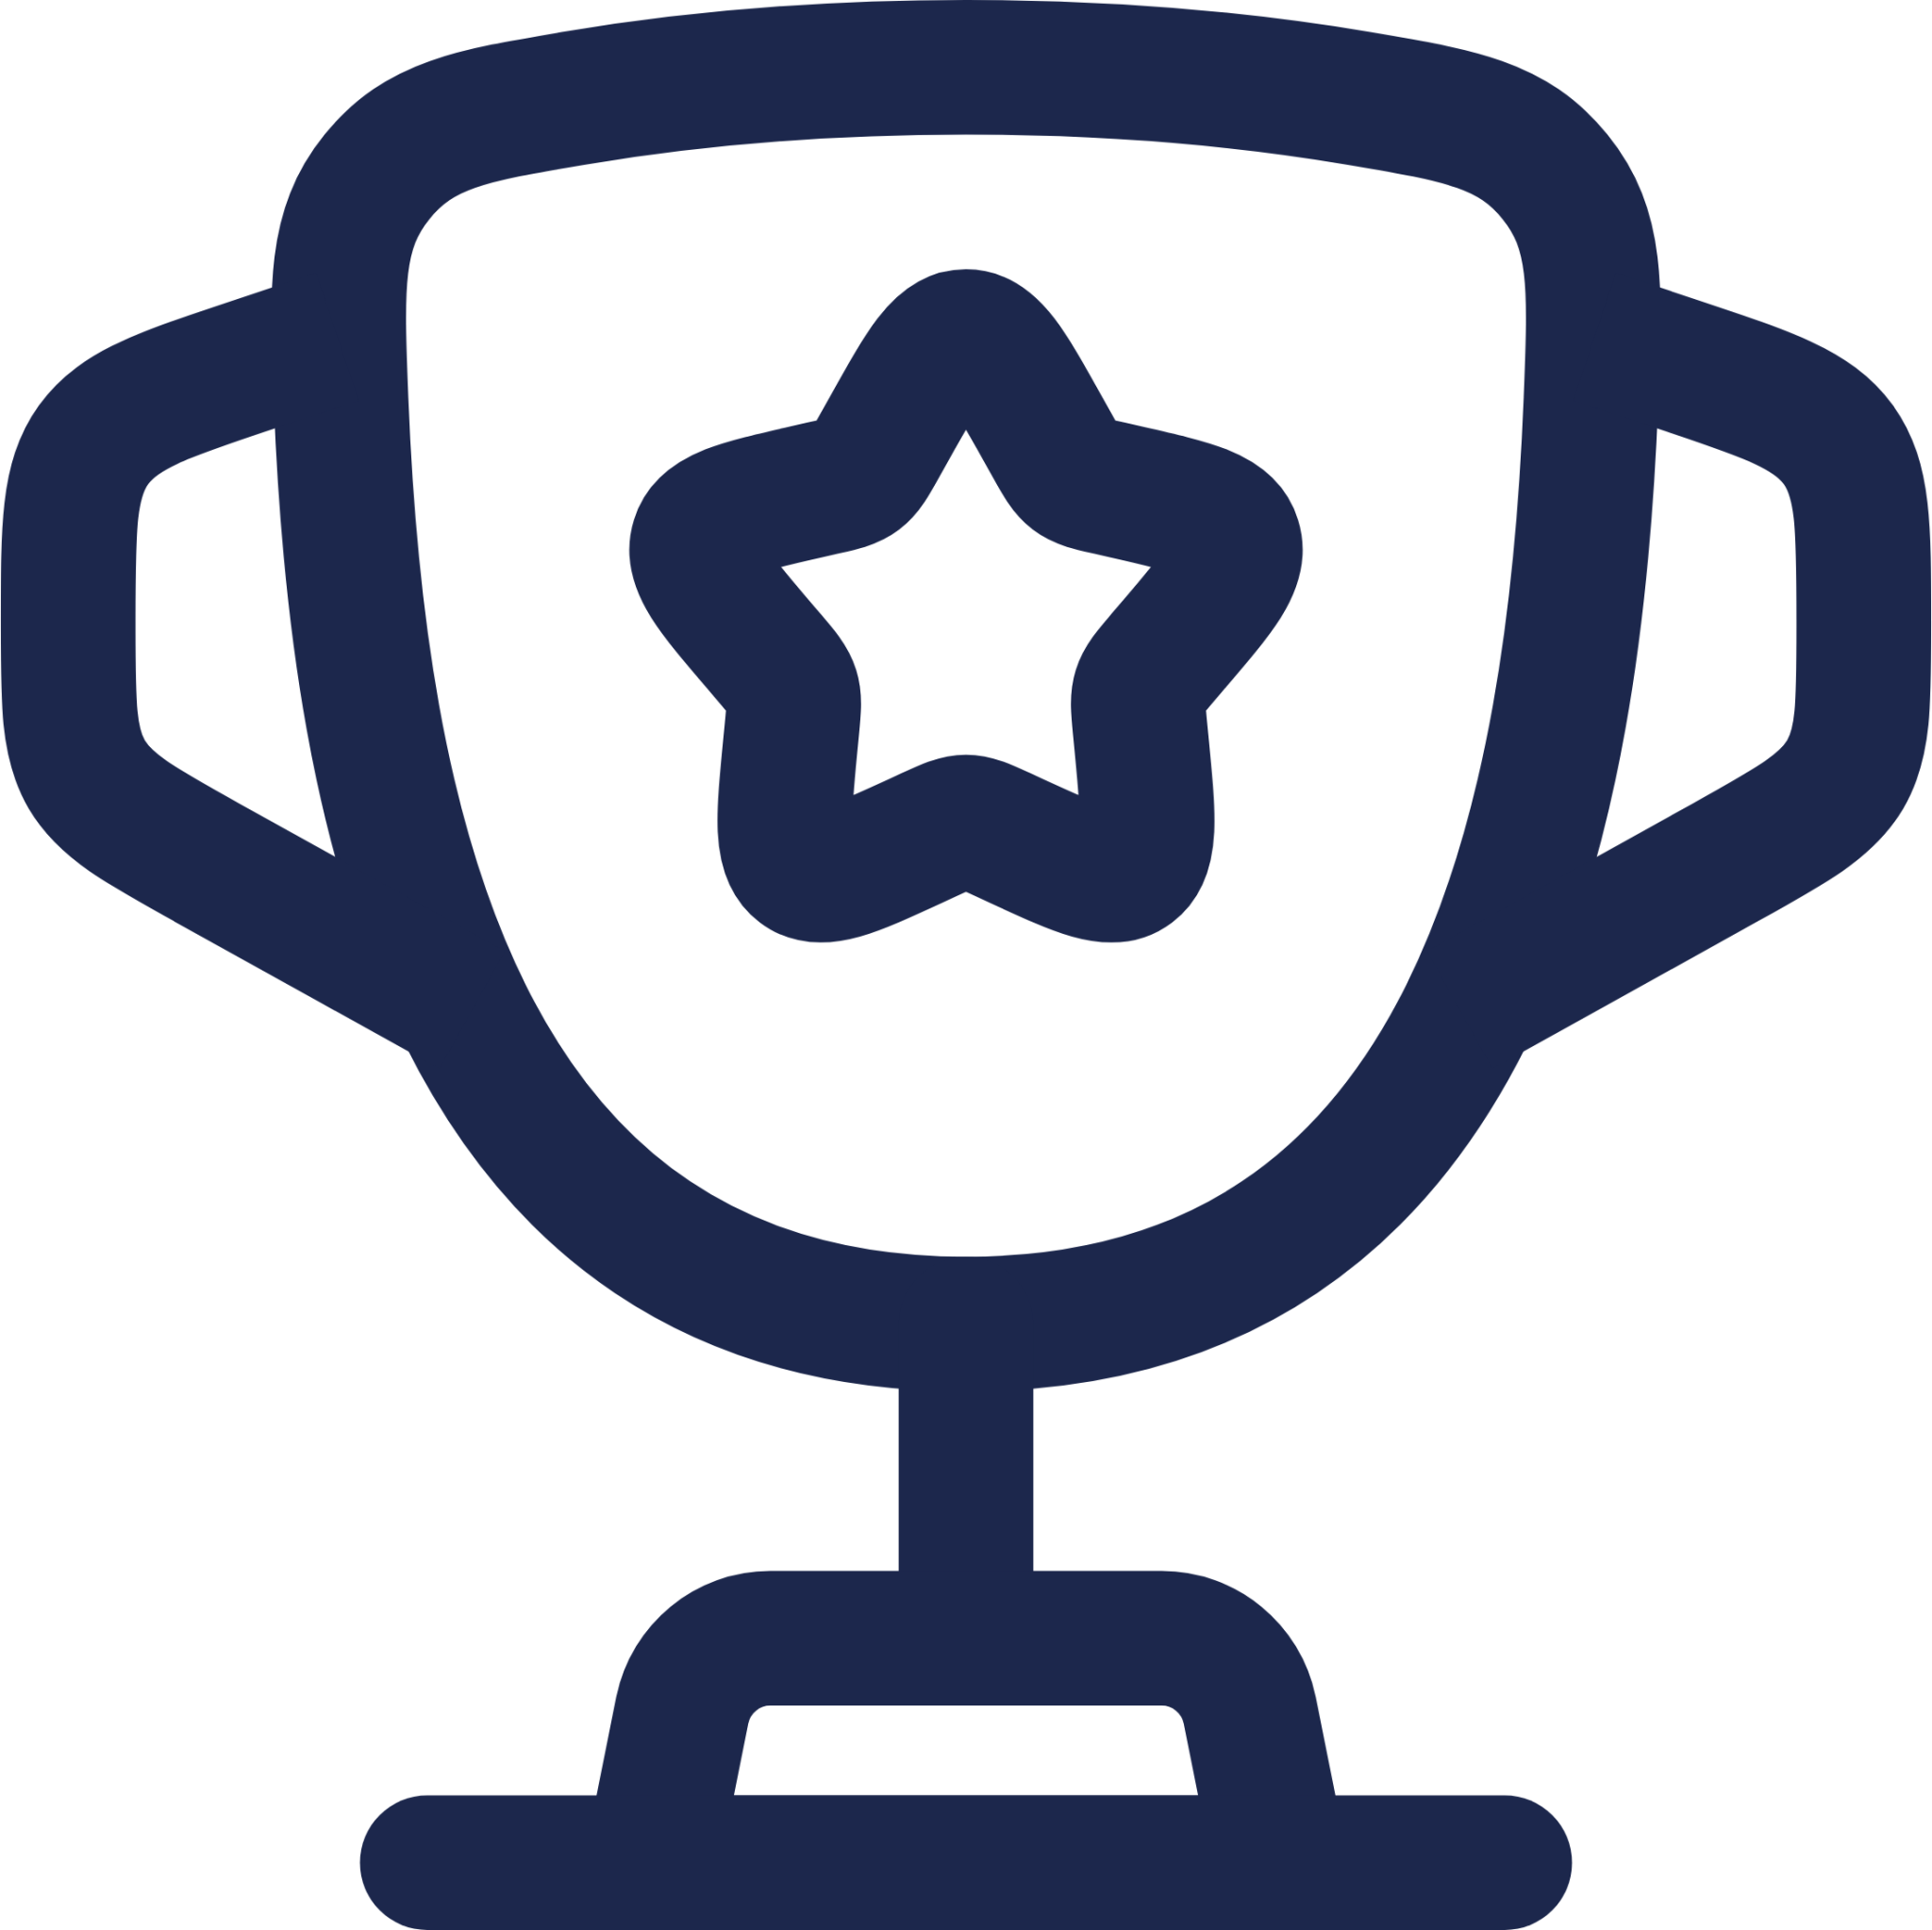 Cup Star icon